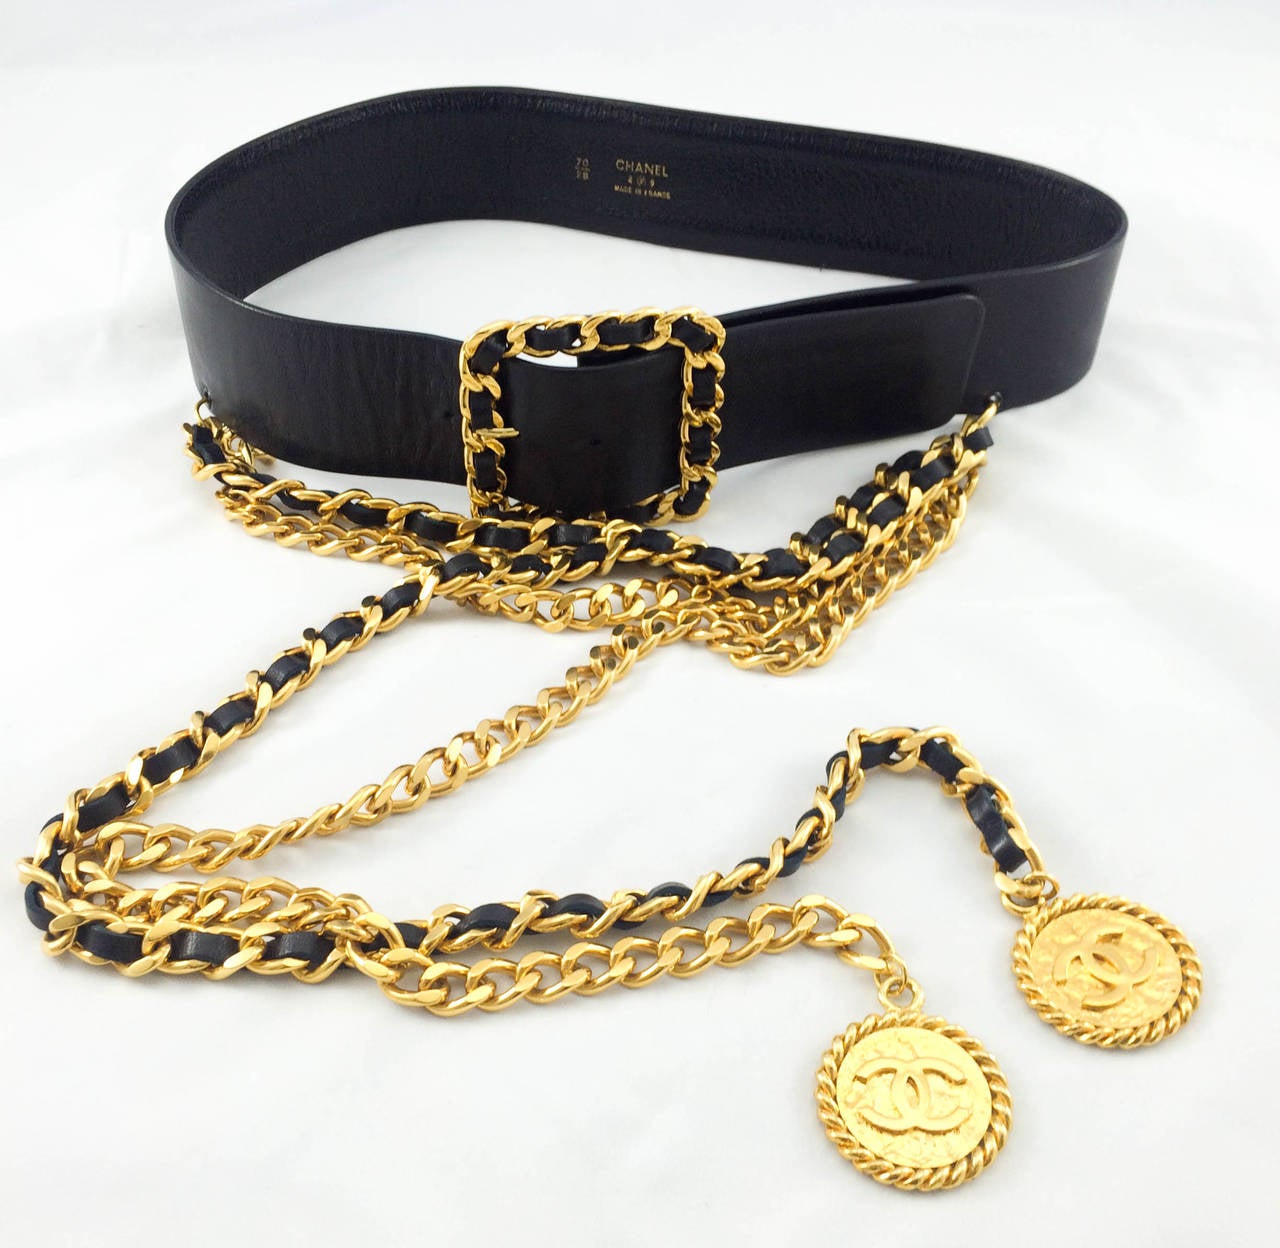 Chanel 1992 Runway Black Leather and Gold Tone Metal Belt